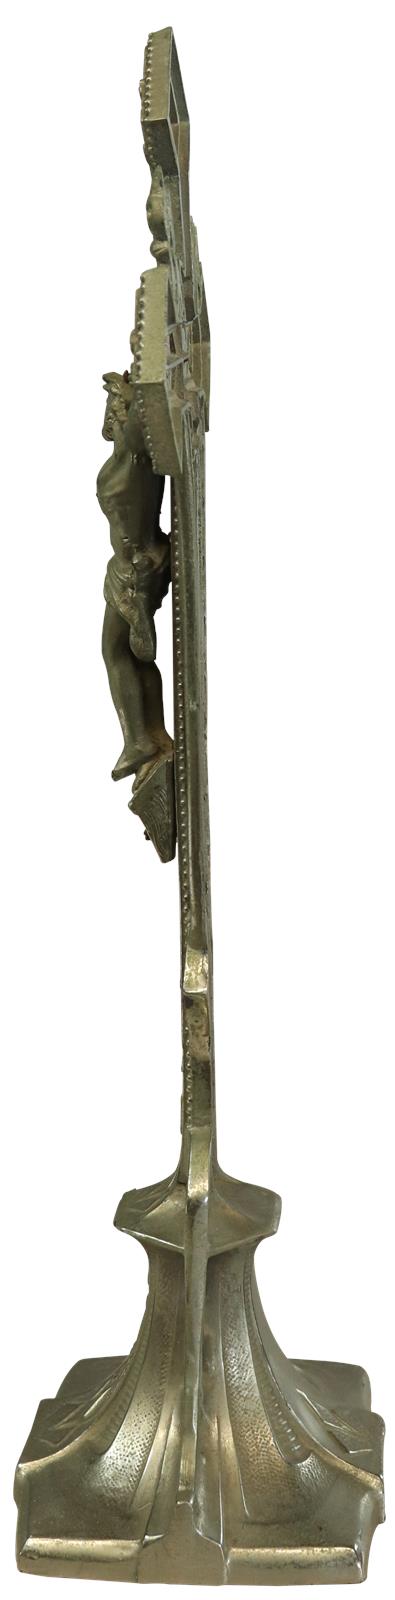 Antique Crucifix Cross Religious Spear and Ladder Metal-Image 3